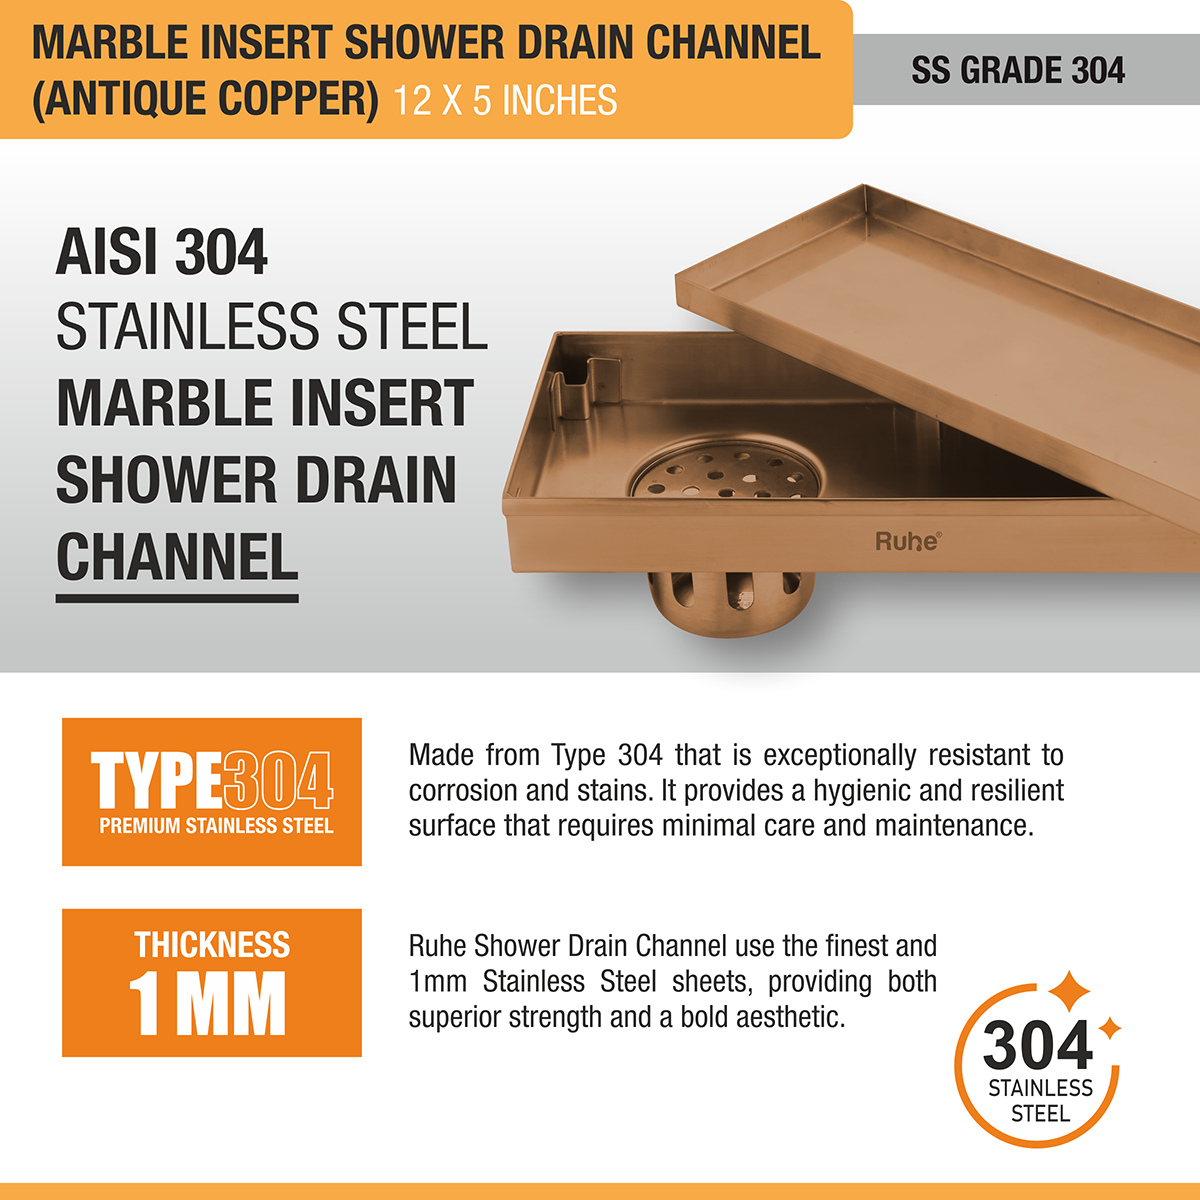 Marble Insert Shower Drain Channel (12 x 5 Inches) ROSE GOLD PVD Coated stainless steel